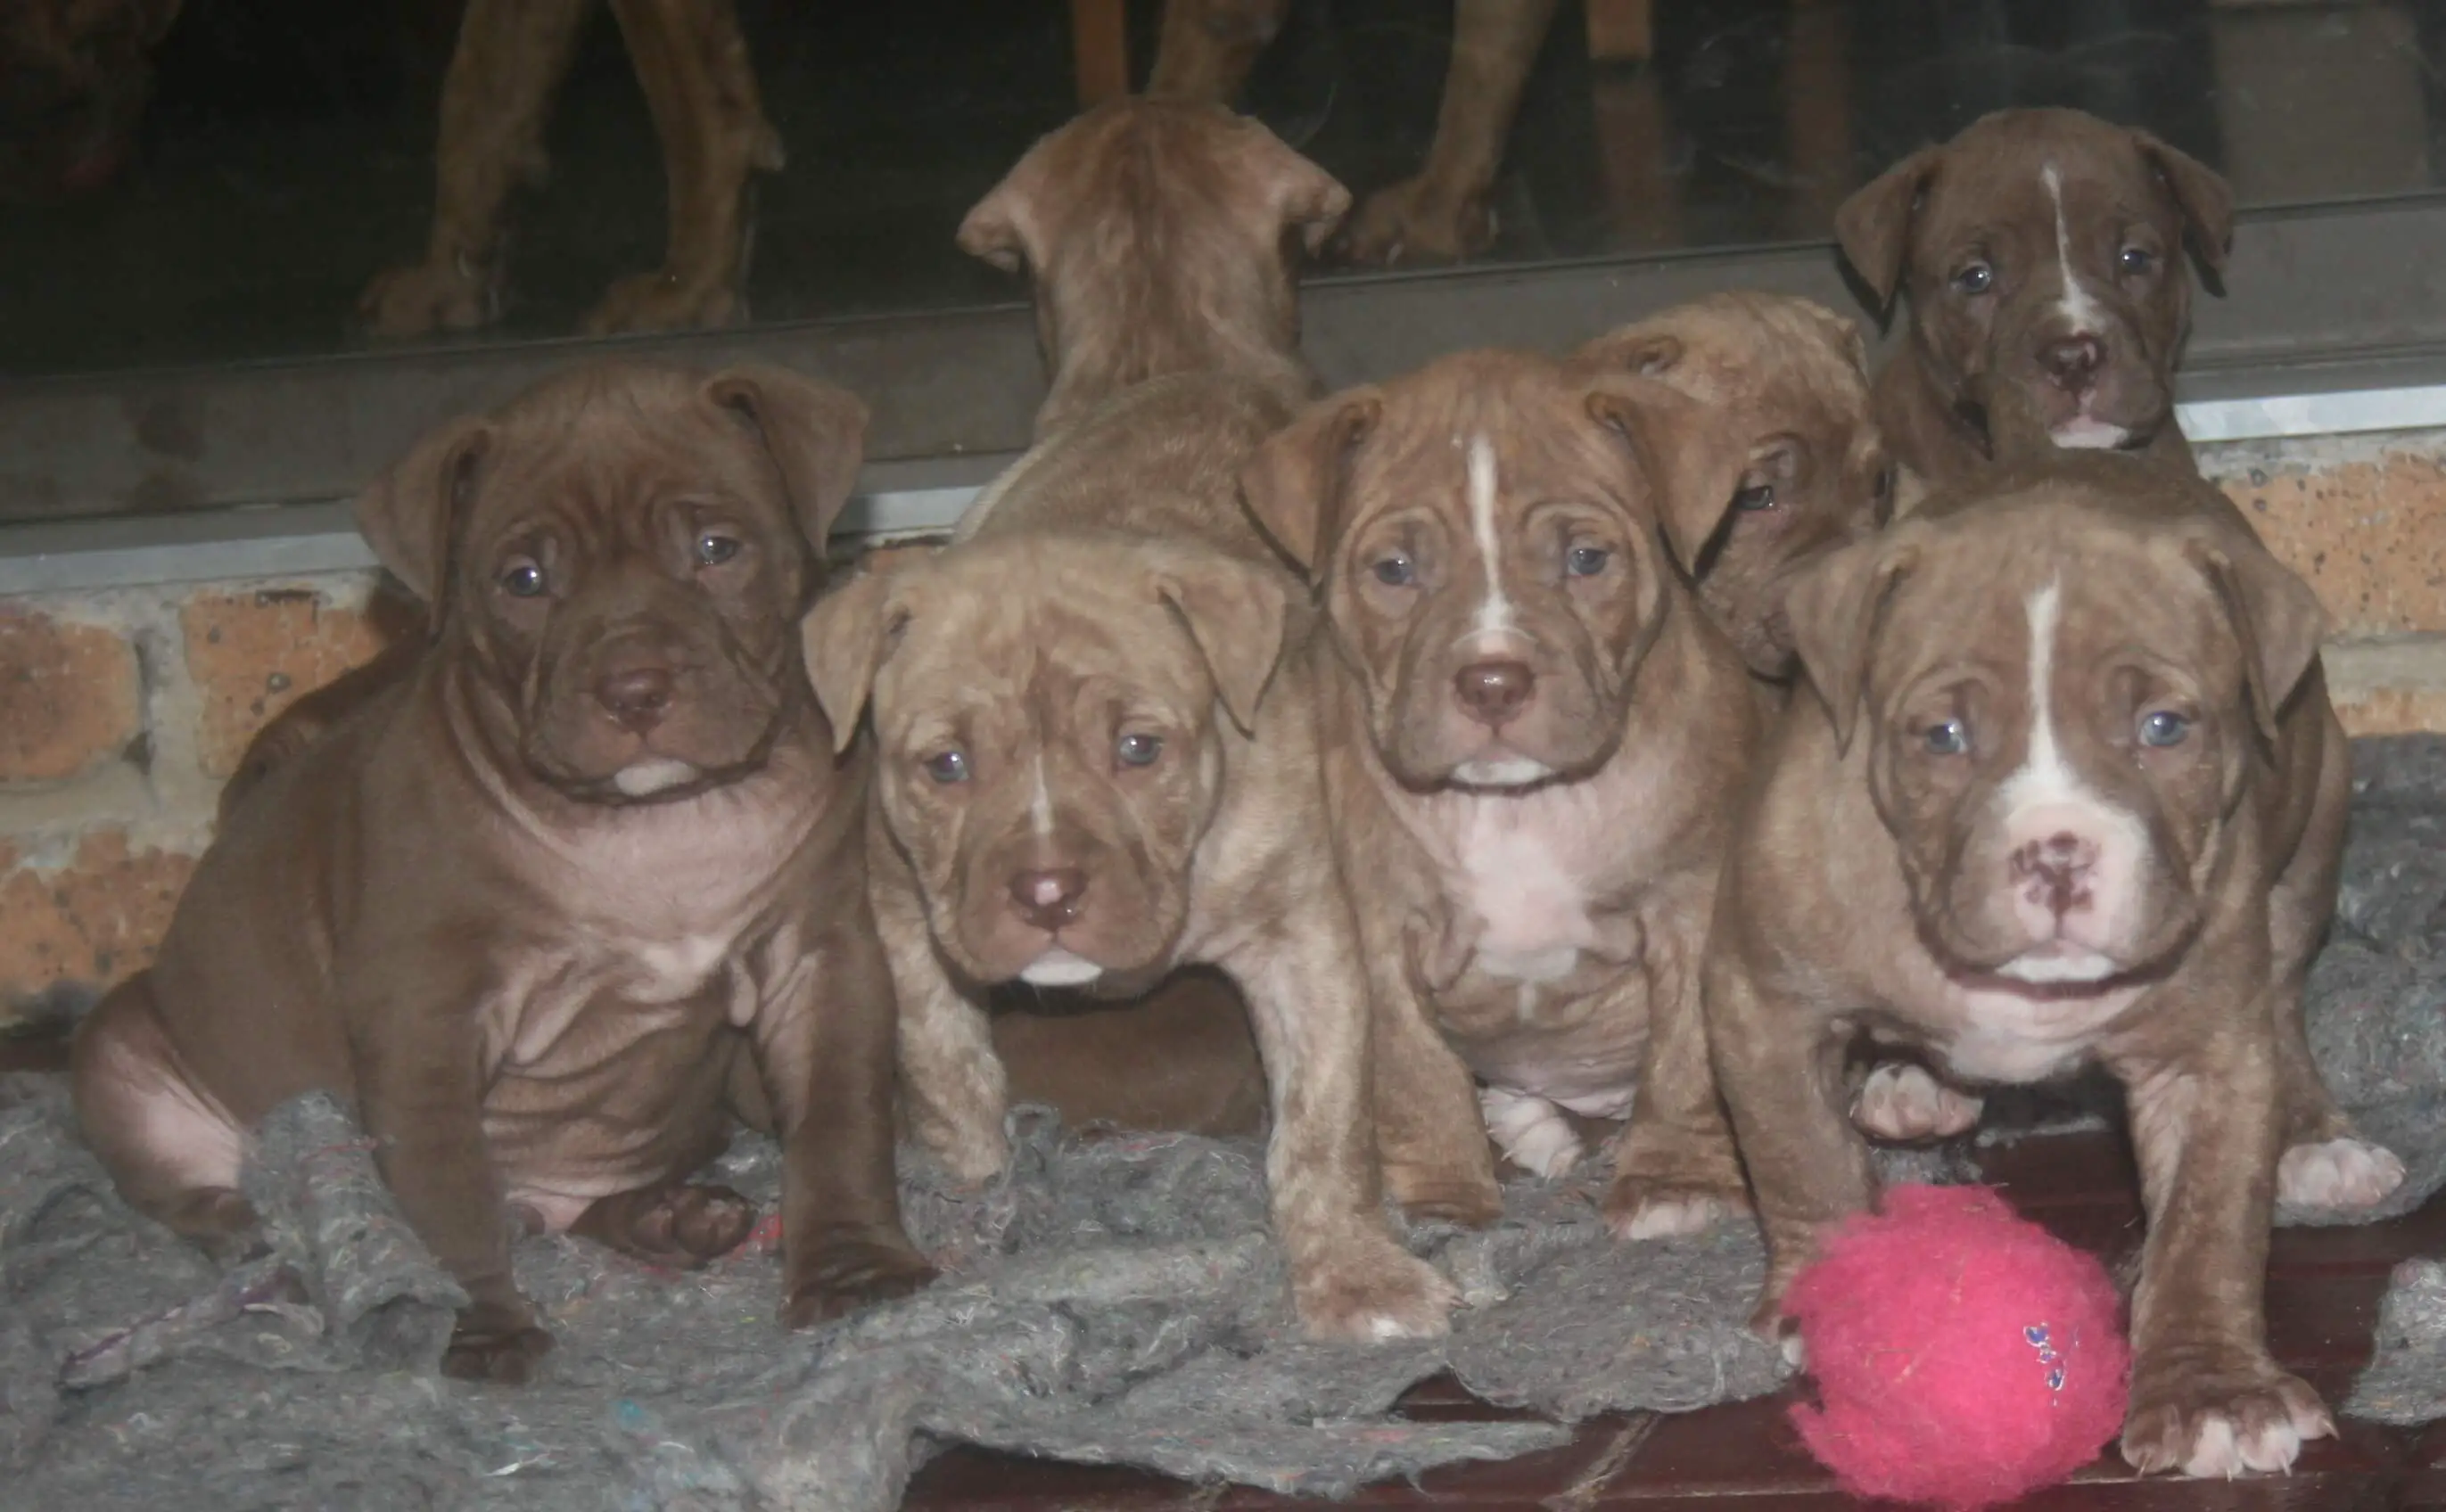 Pitbull Puppies for Sale in Johannesburg by Kim Coetzee